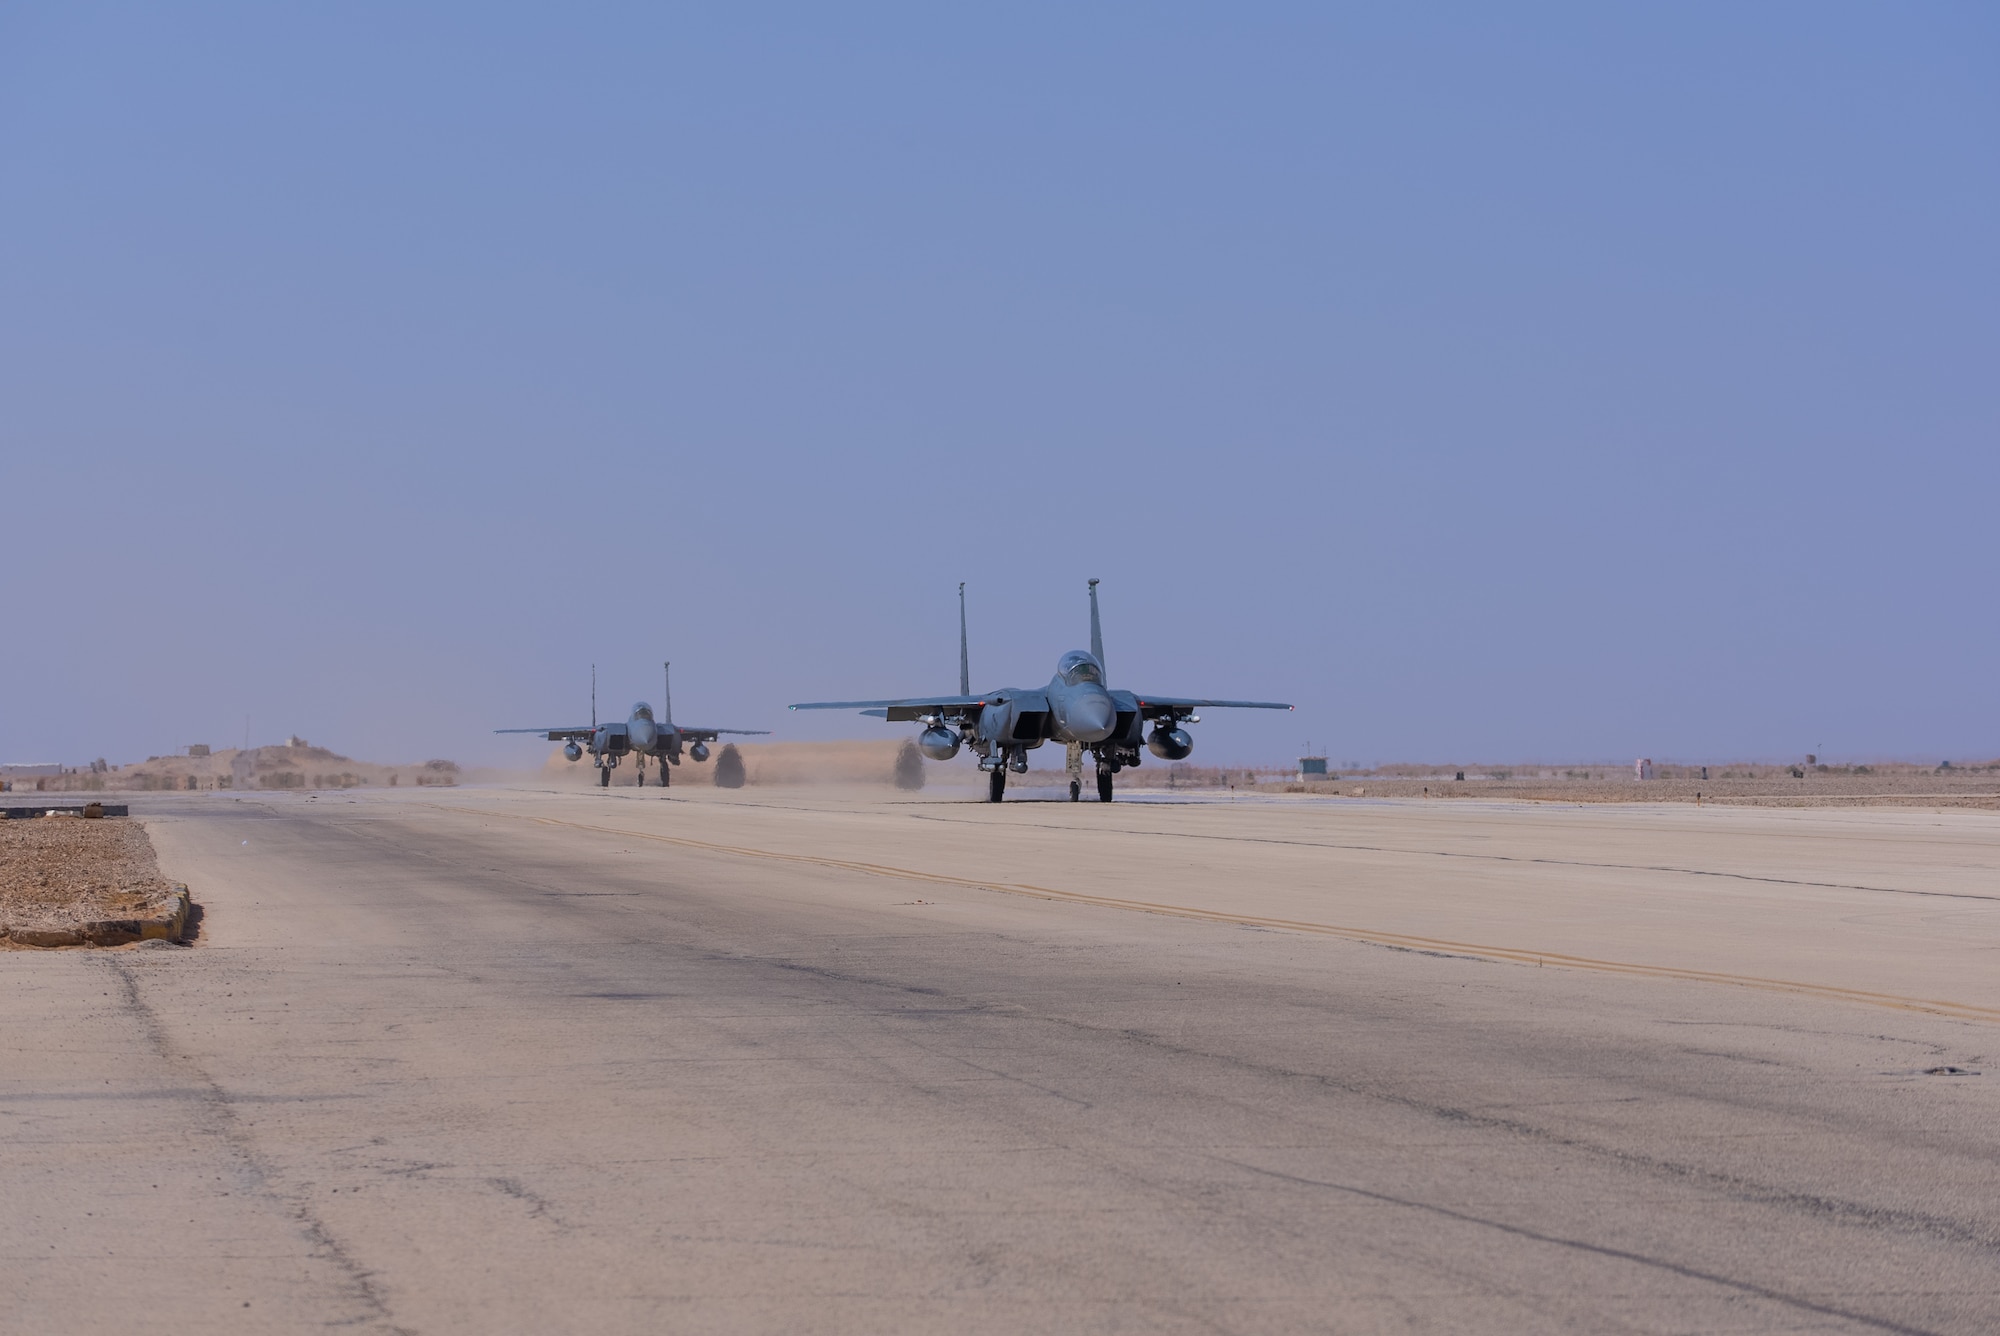 U.S. Air Force F-15E Strike Eagles with the 335th Expeditionary Fighter Squadron taxi on a runaway at at an undisclosed location in Southwest Asia, September 27-28, 2022. The F-15E tested its capability to rapidly mobilize at a Forward Operating Site. (U.S Air Force Photo by Tech Sgt. Melissa Isidro)